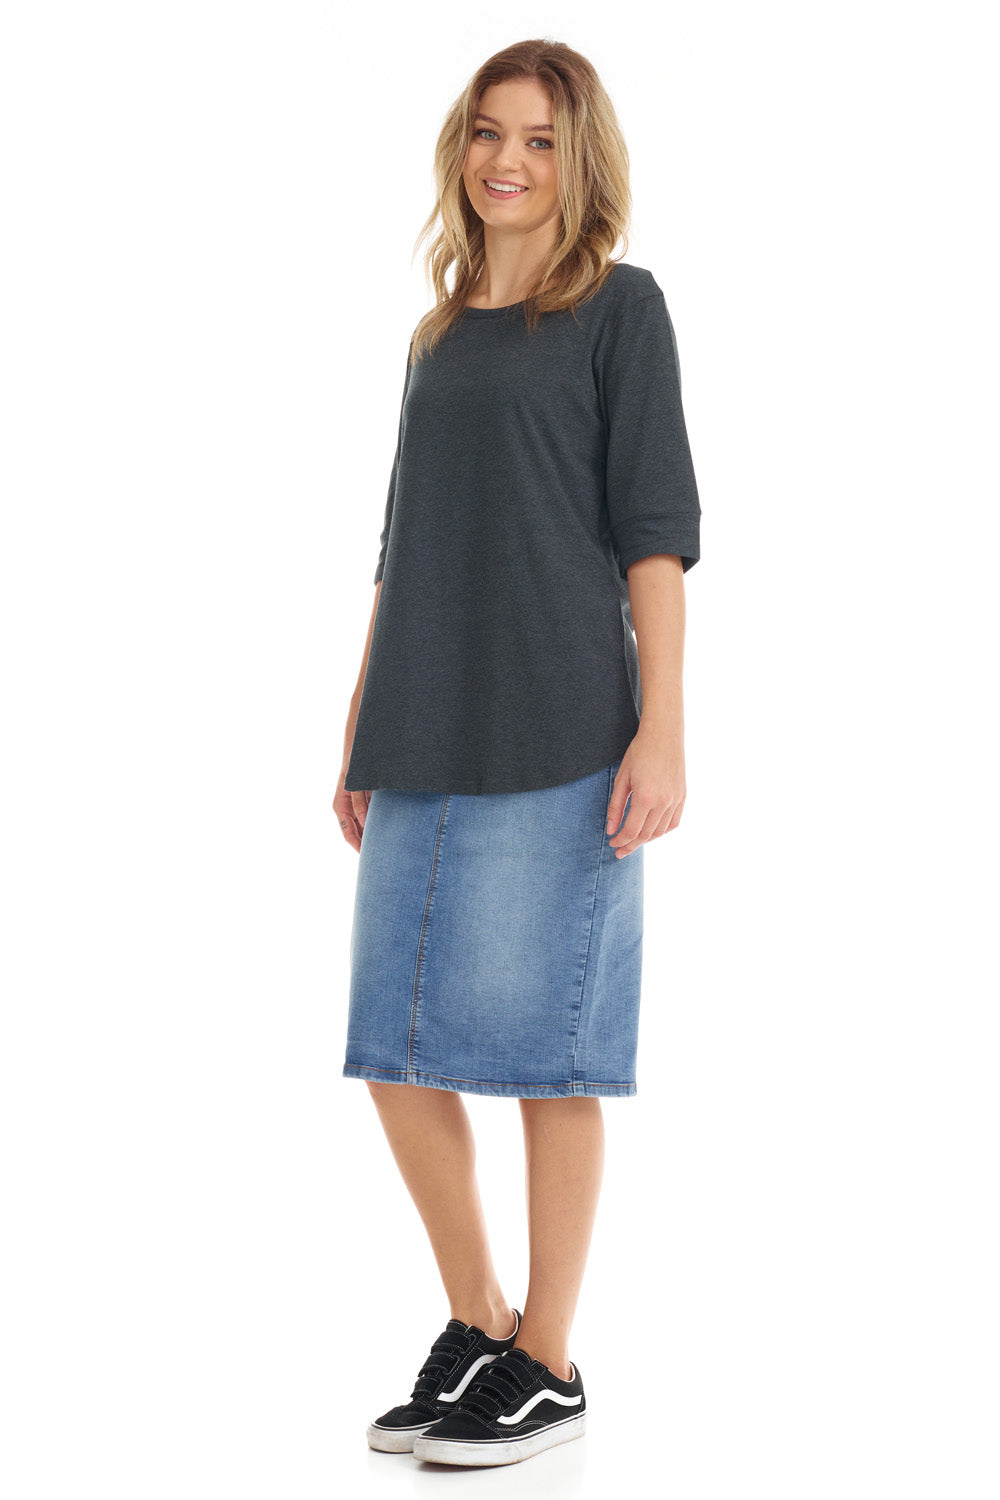 charcoal grey elbow sleeve cottonyznius tee with cuff sleeve for women